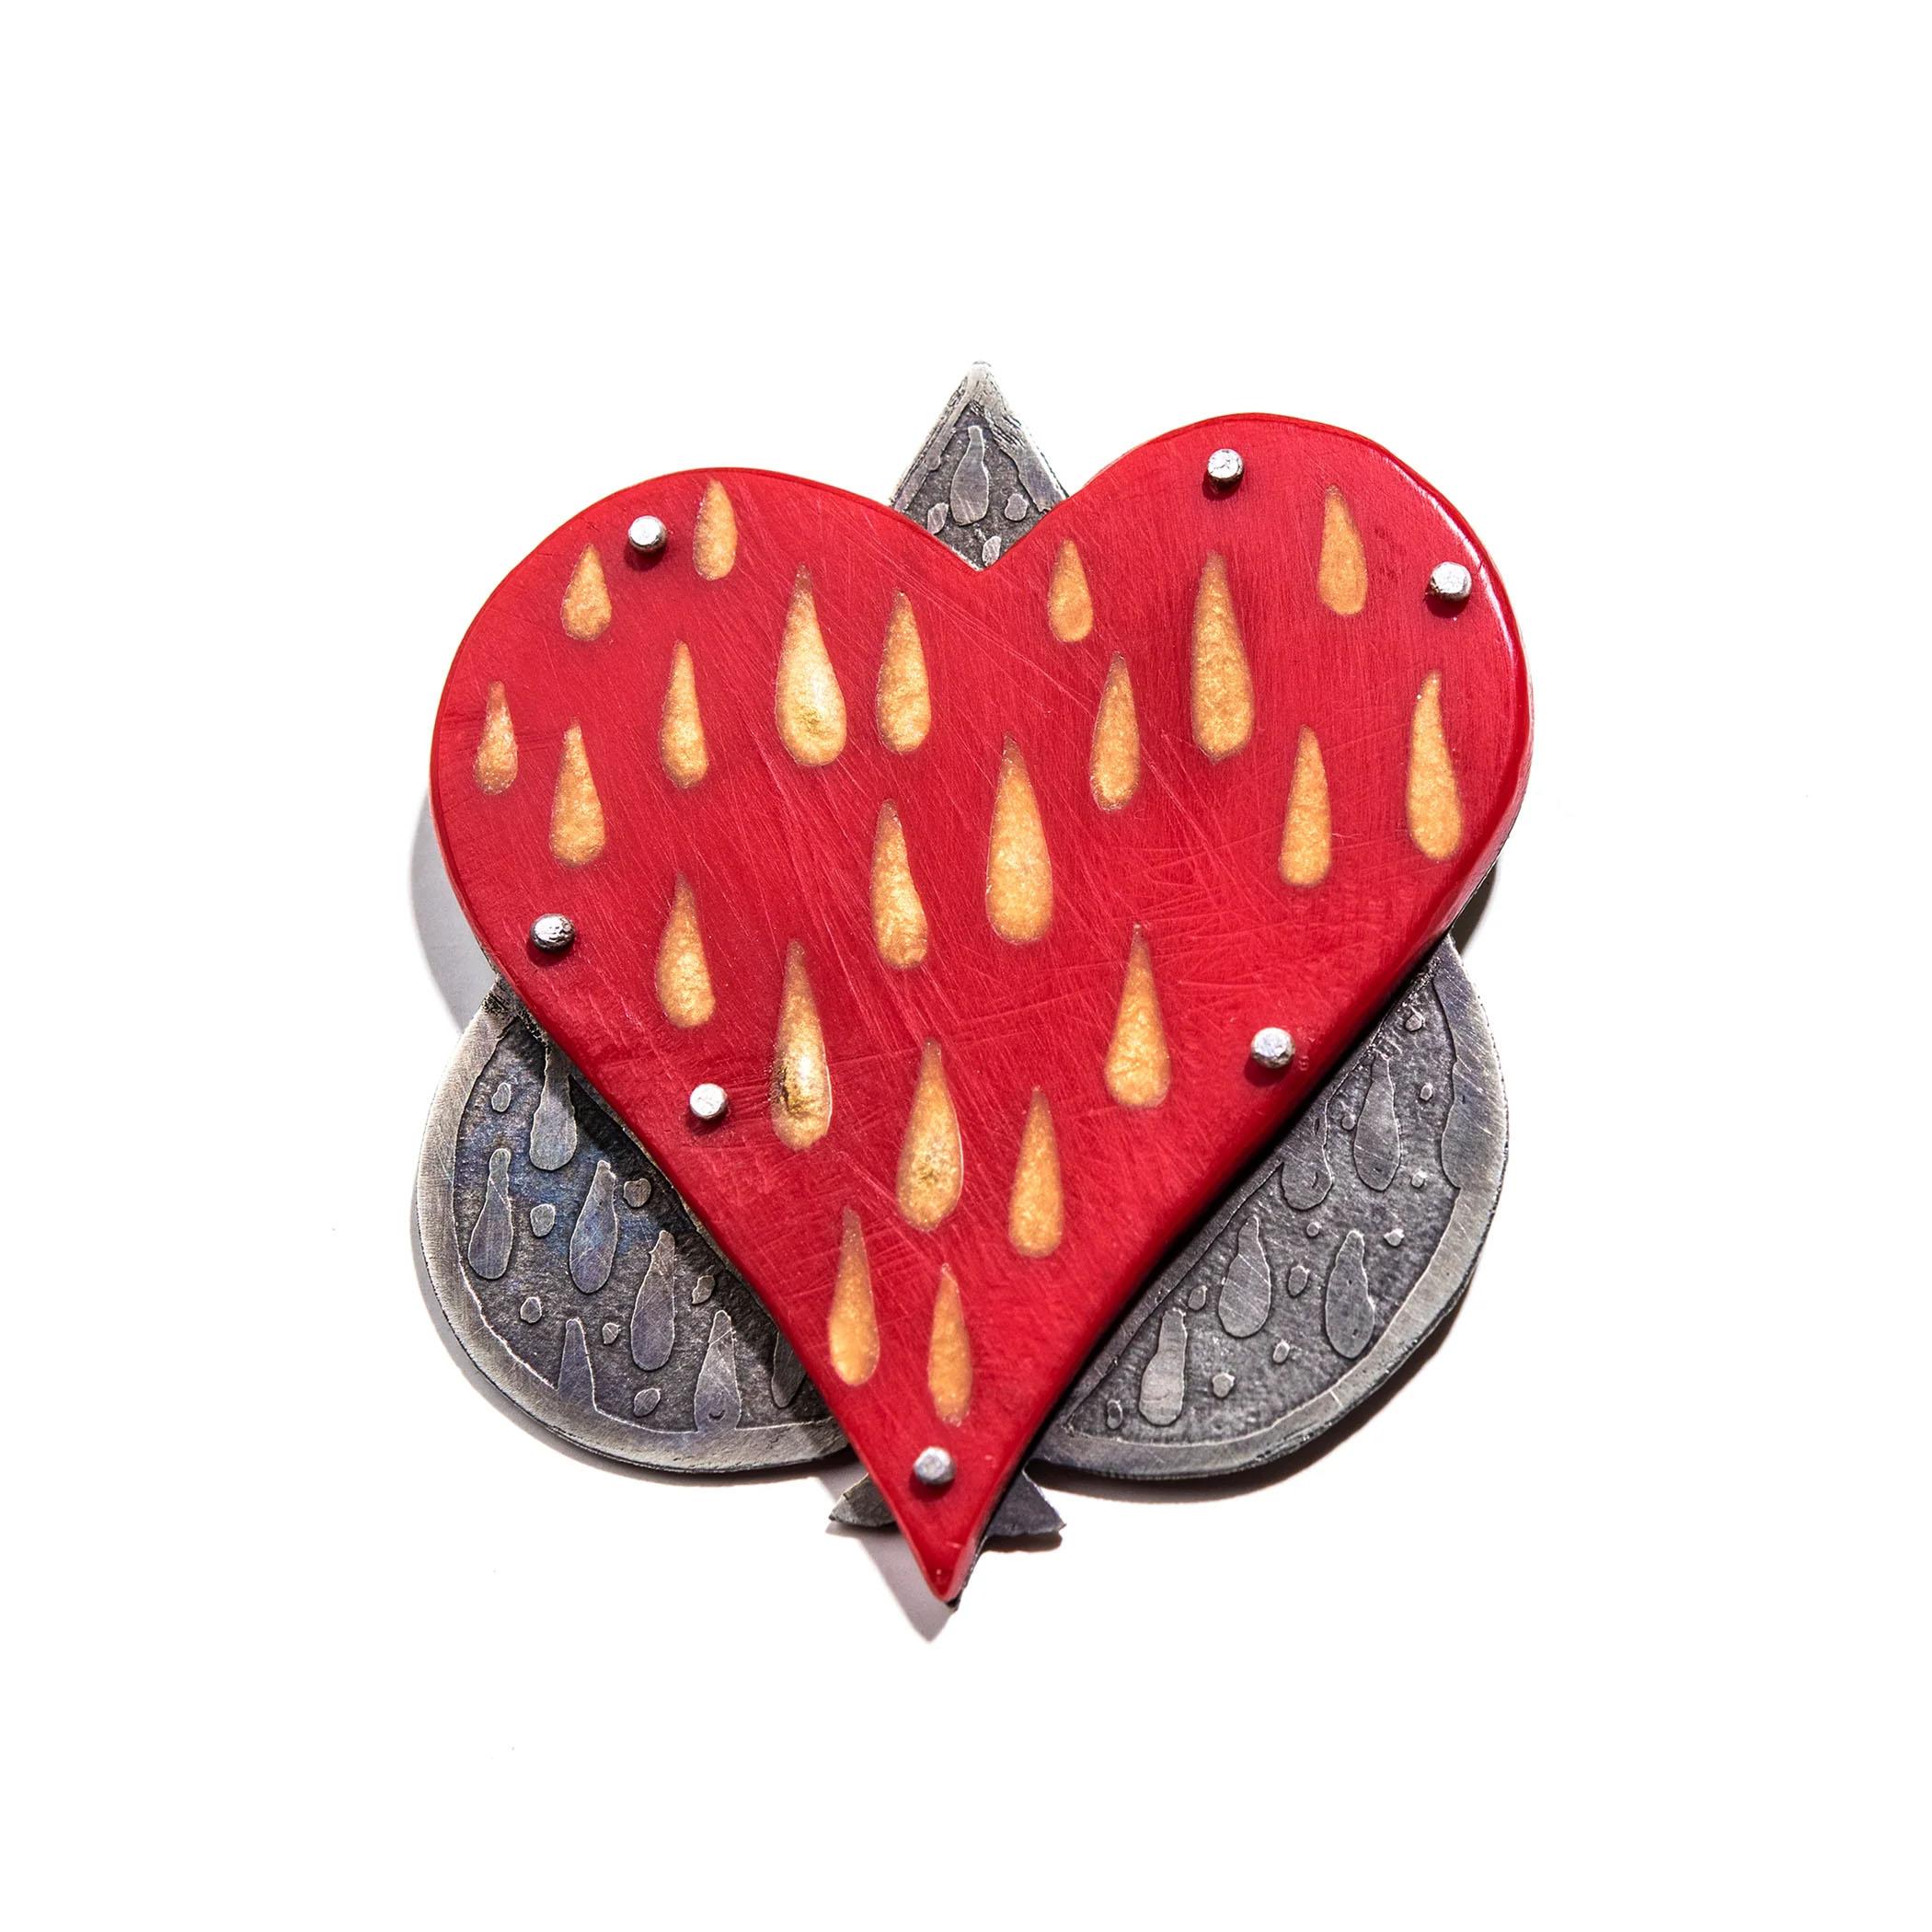 Heart Rain Spade Lapel Pin Jewelry, FPavy designer , made by T Mann design - Art by FPA Francis Pavy Artist